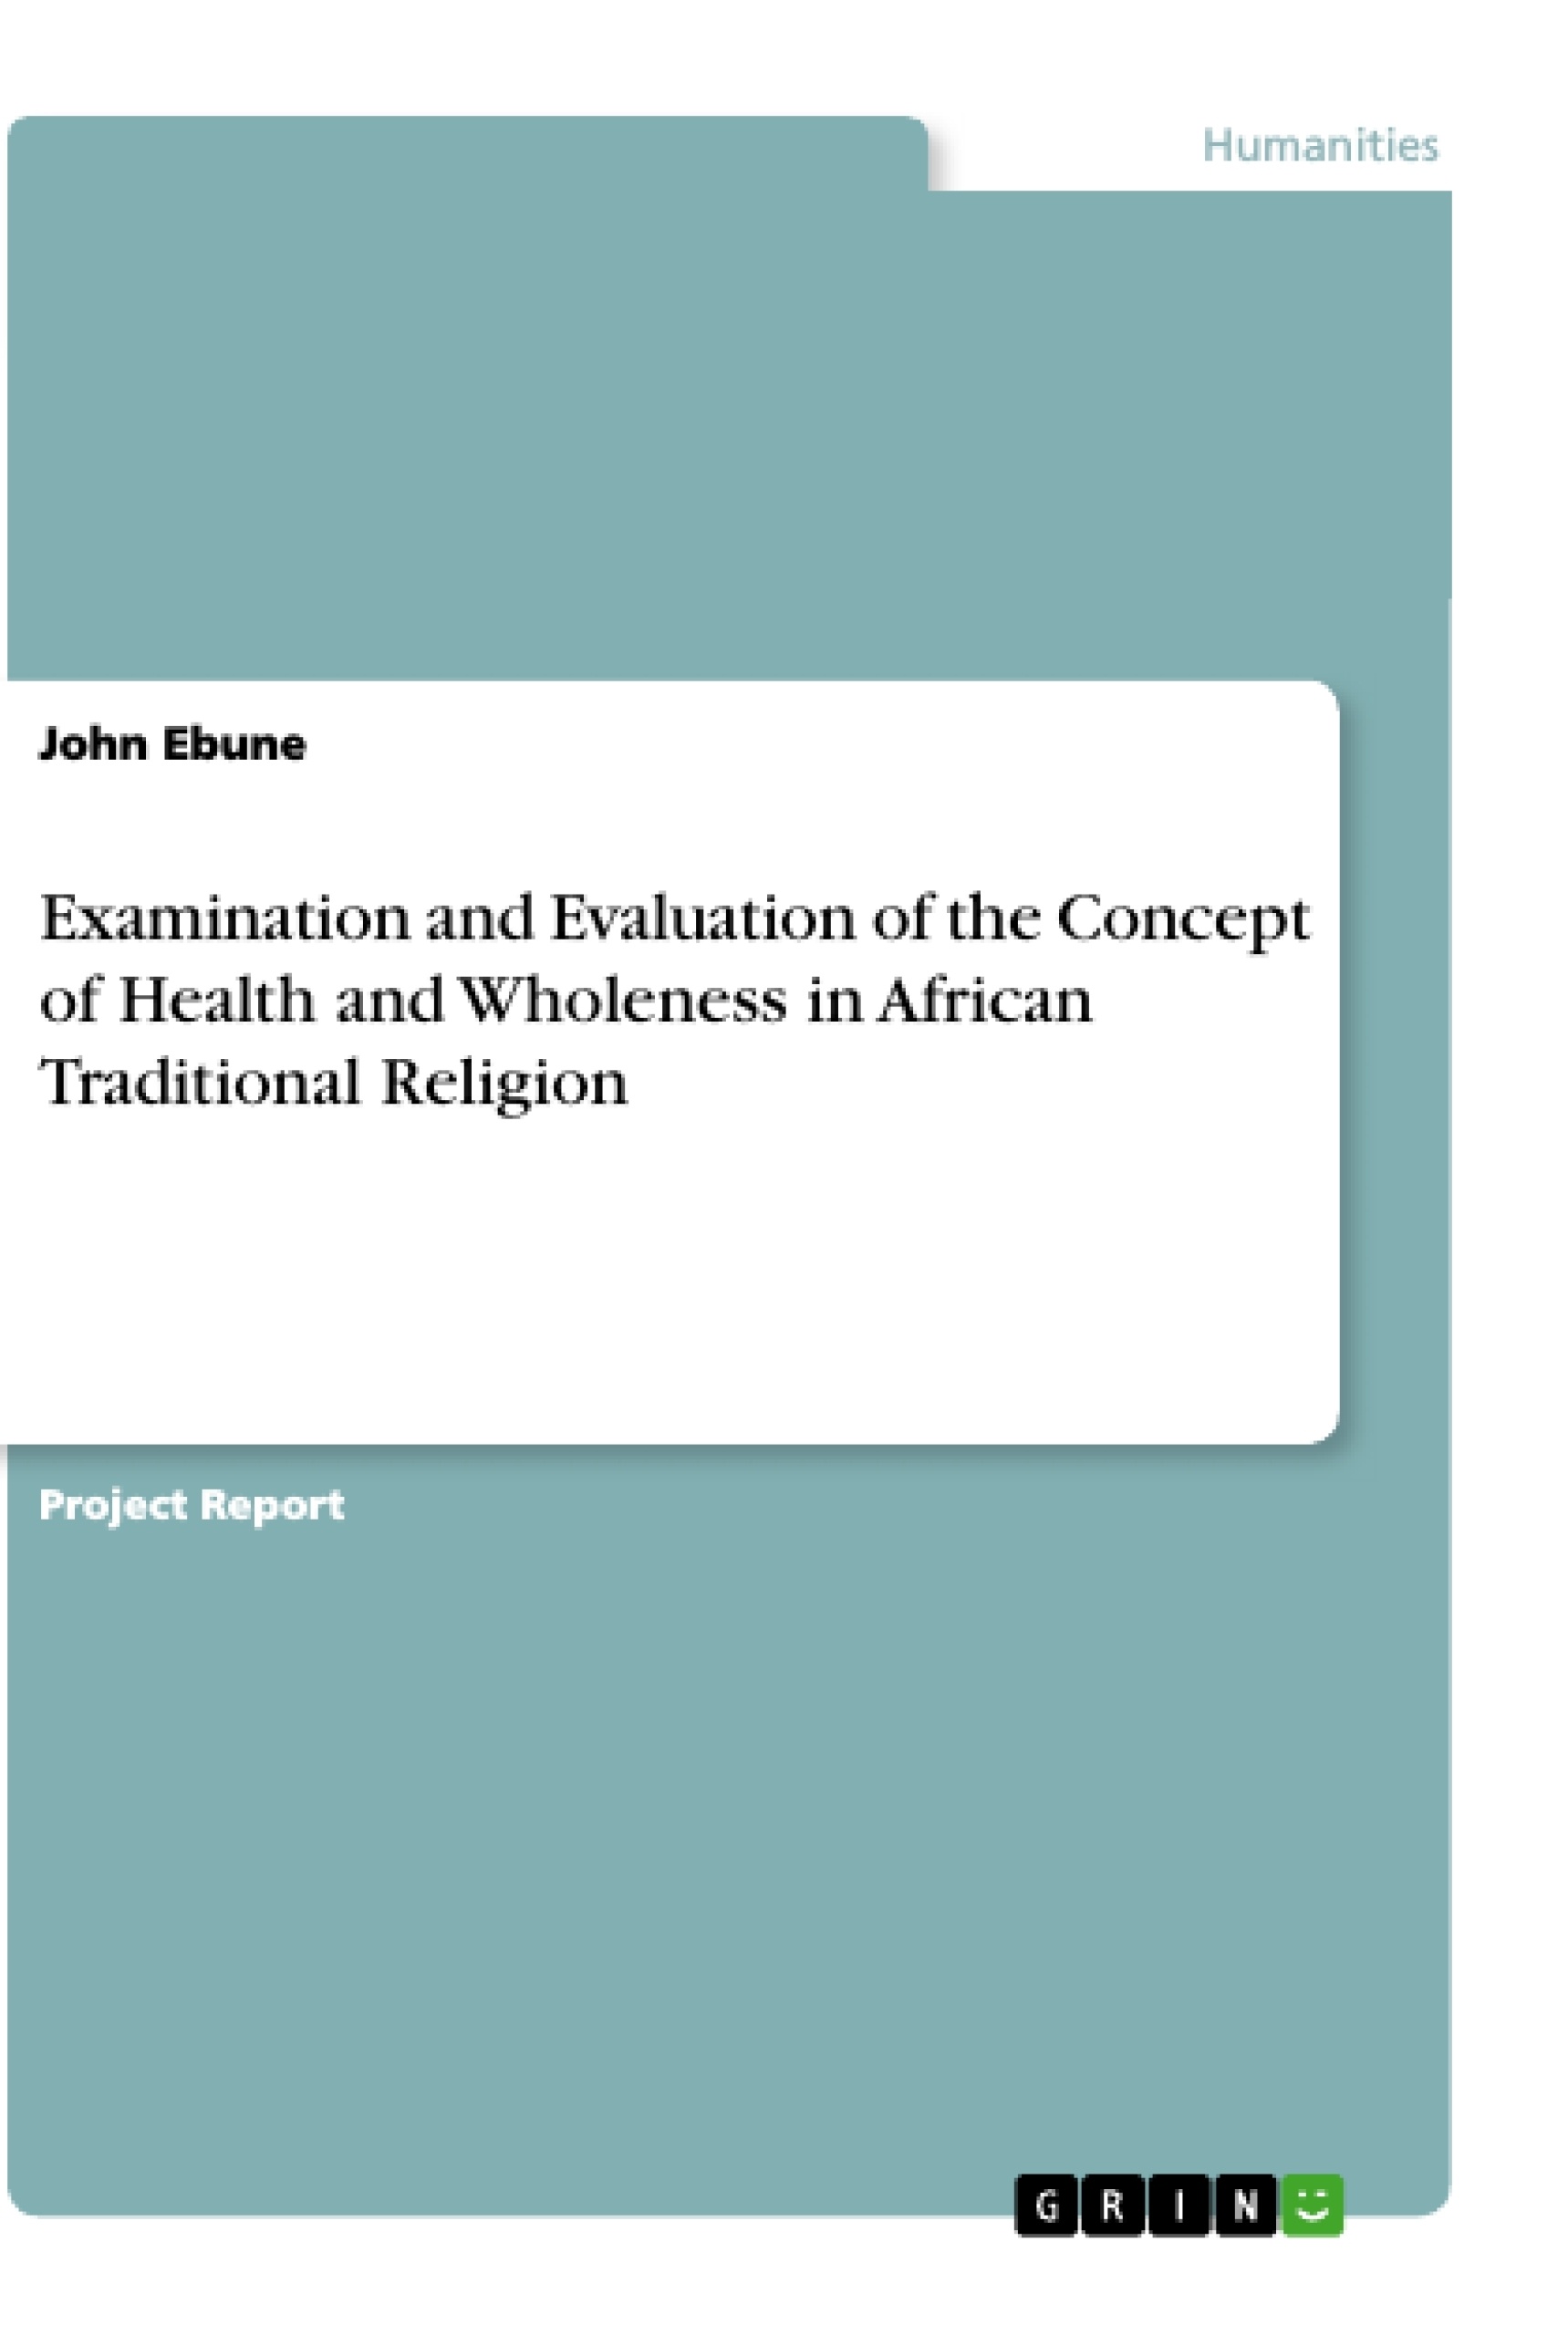 Title: Examination and Evaluation of the Concept of Health and Wholeness in African Traditional Religion